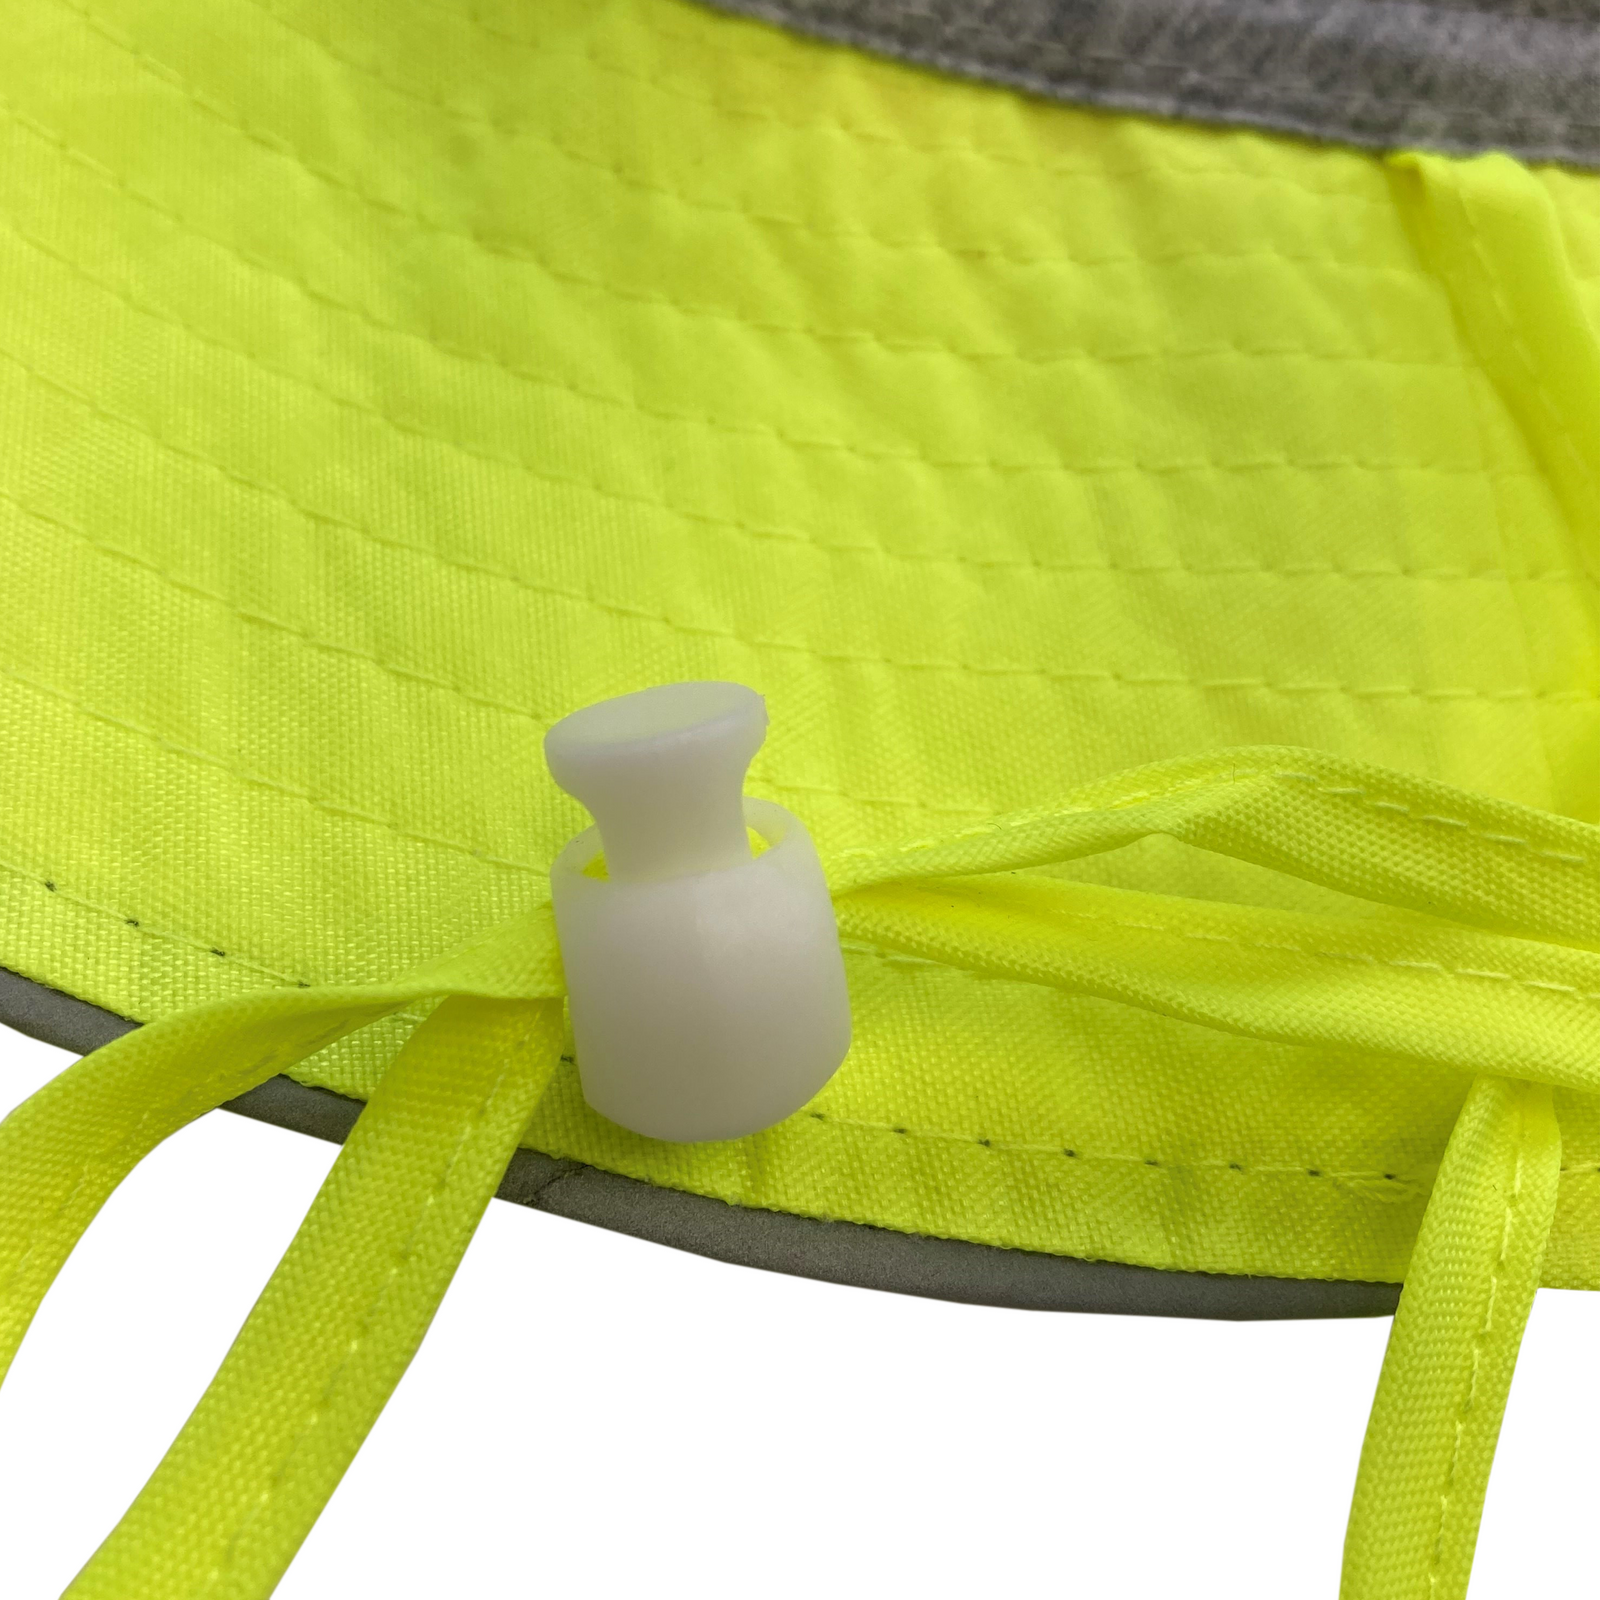 Close up to show the adjustable strap on the lime safety reflective boonie hat